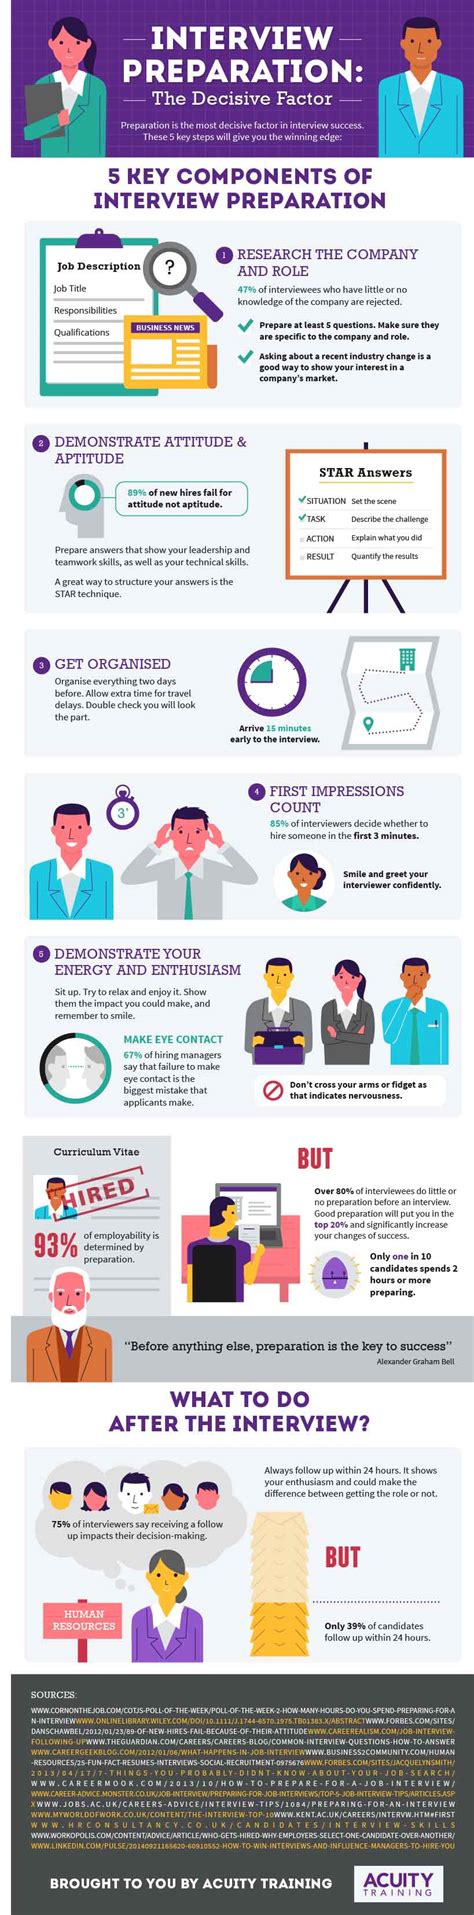 interview preparation infographic acuity training